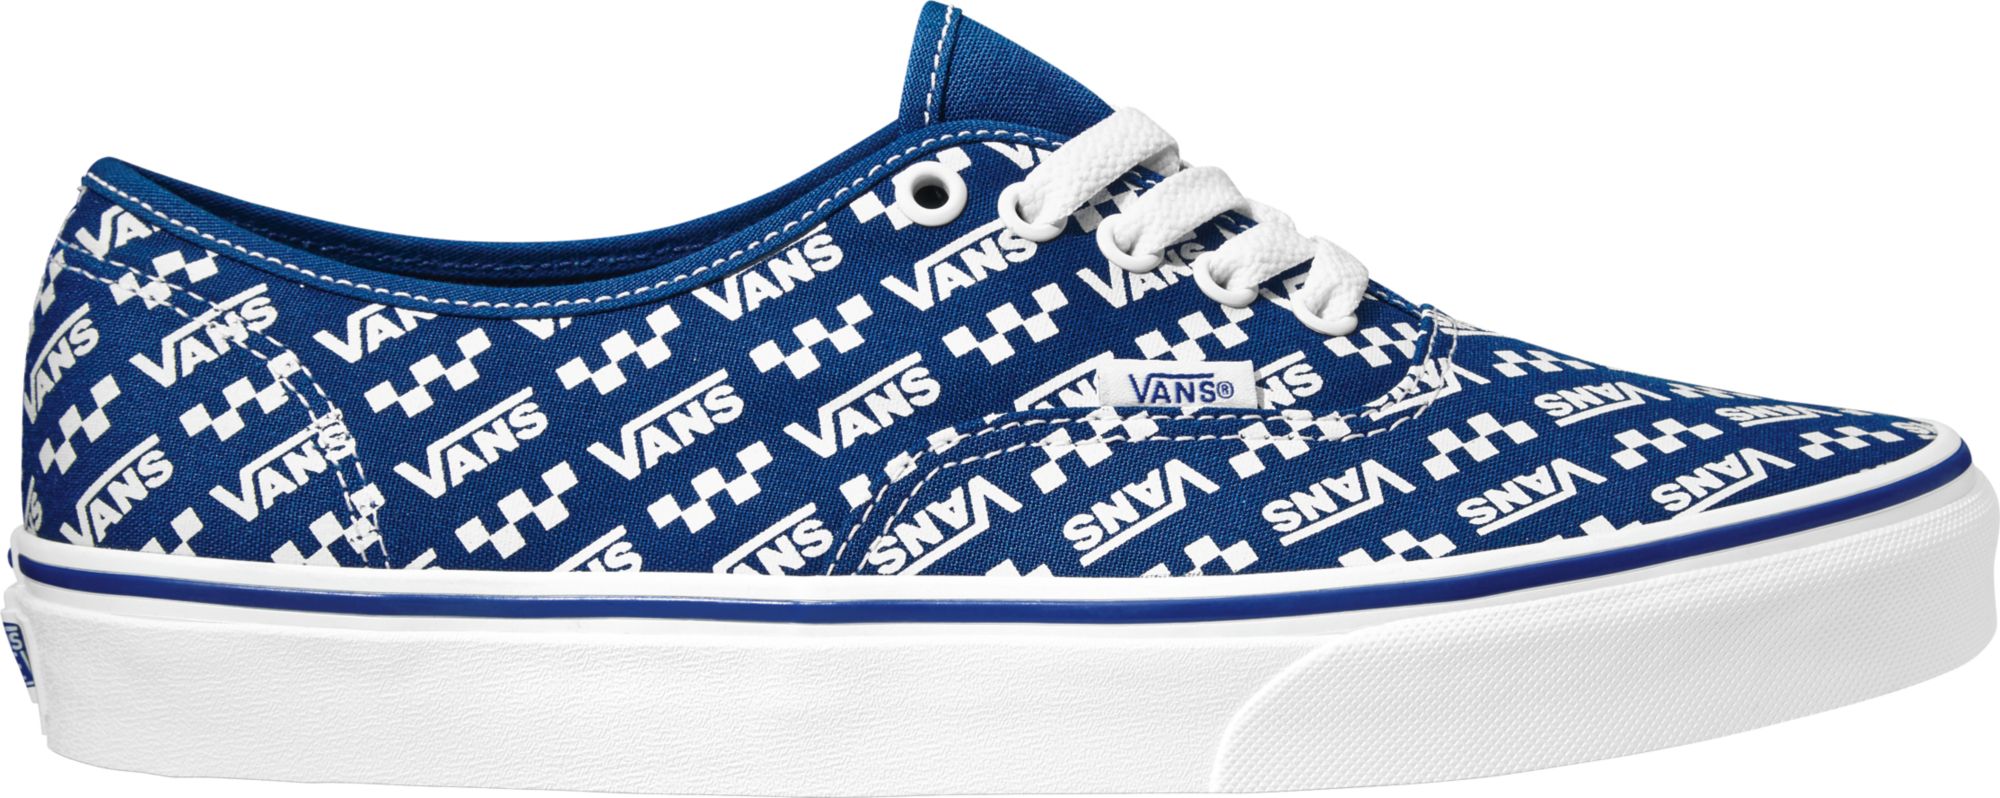 where to find van shoes